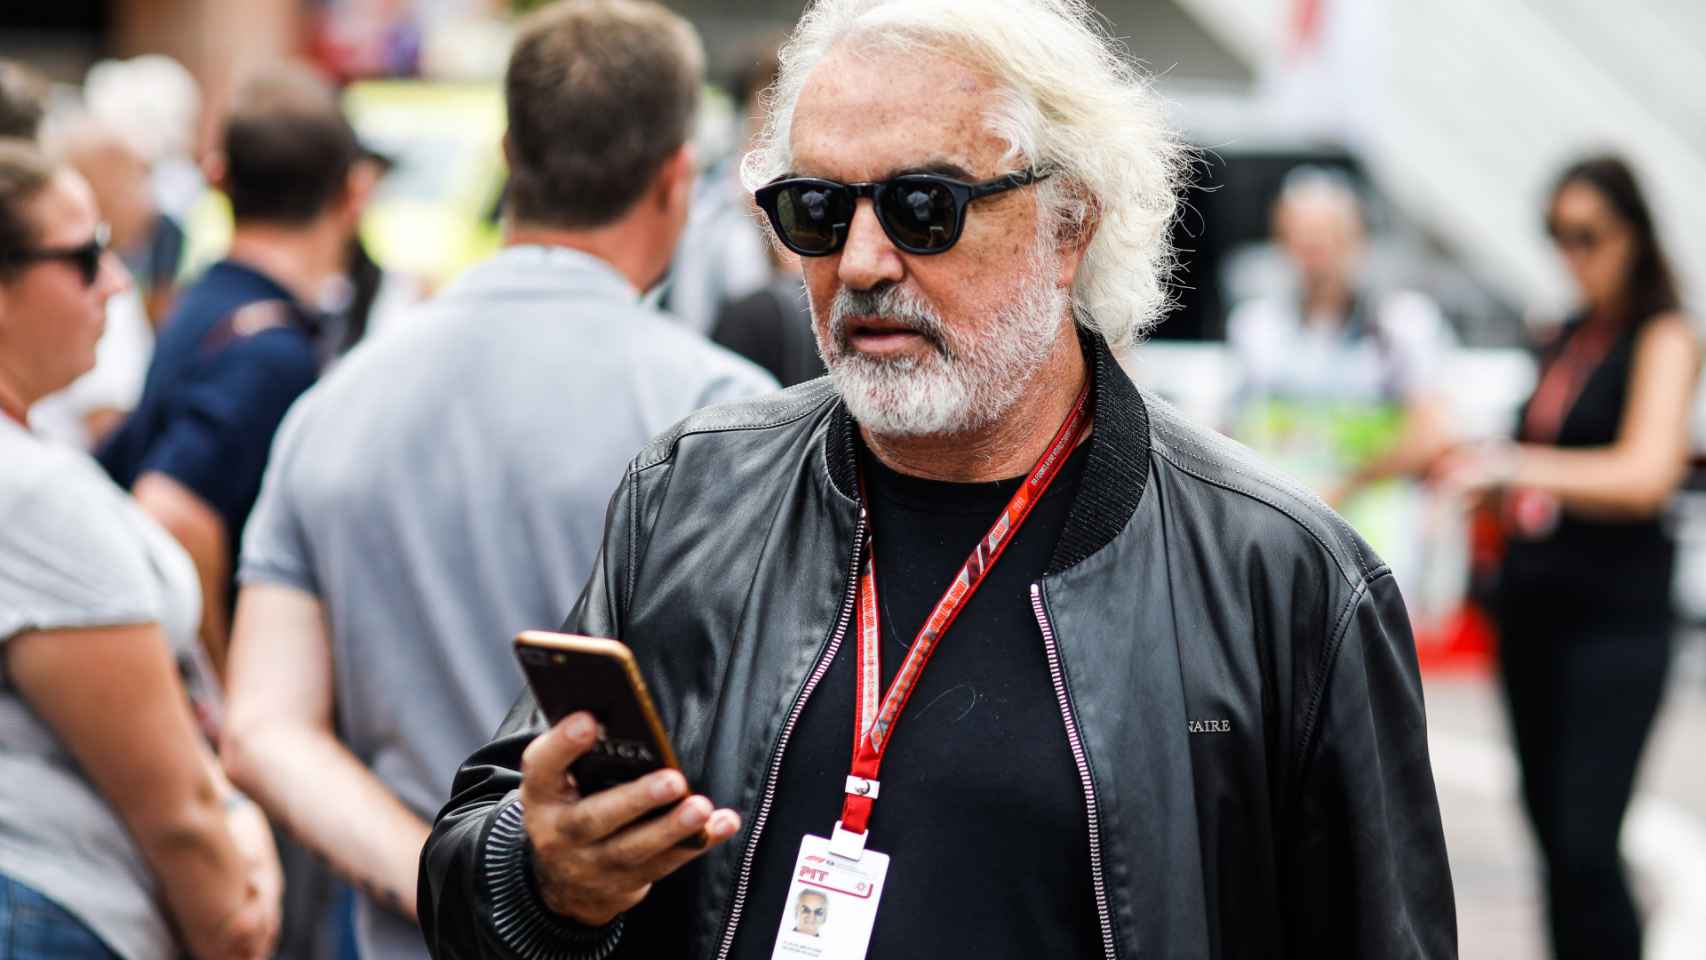 Flavio Briatore returns to Formula 1: “A new chapter is about to start”